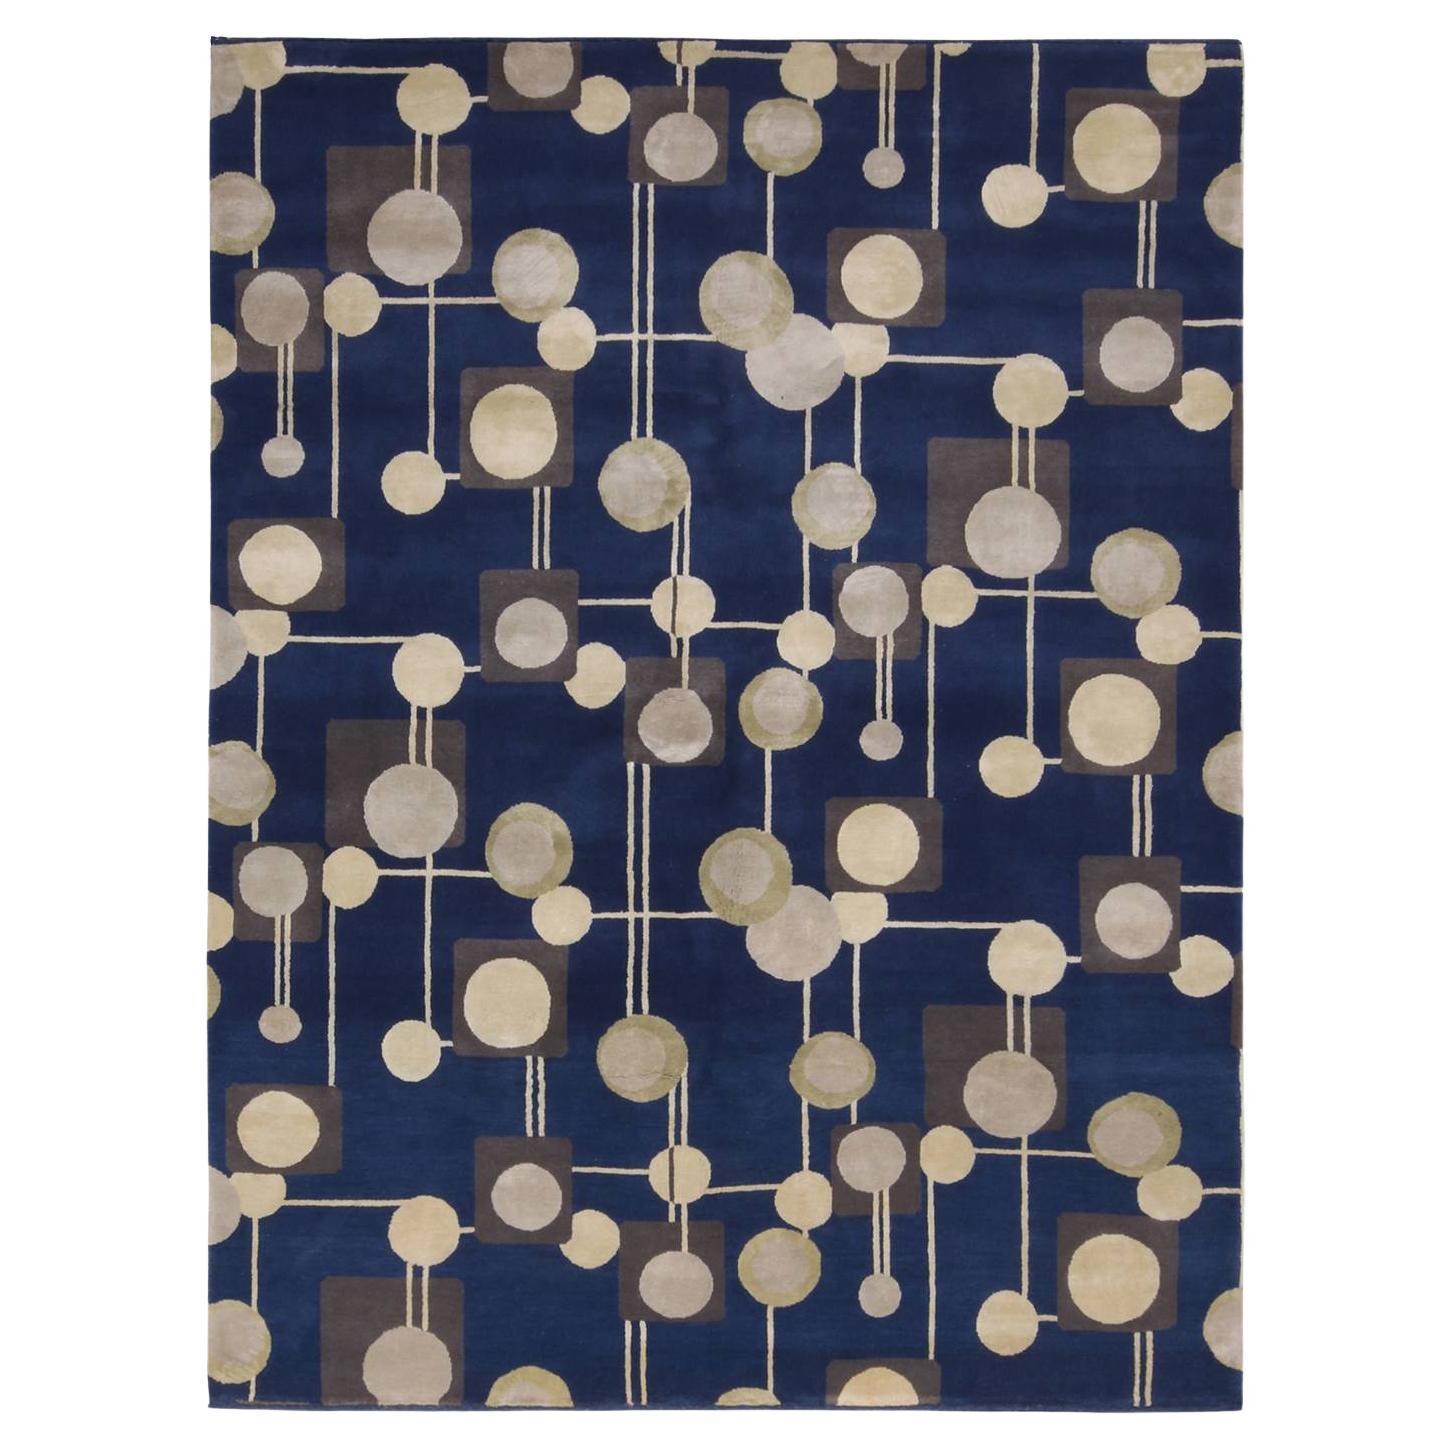 Blue Circle Mid-Century Modern Rug 6 Ft 3 in x 8 Ft 2 in